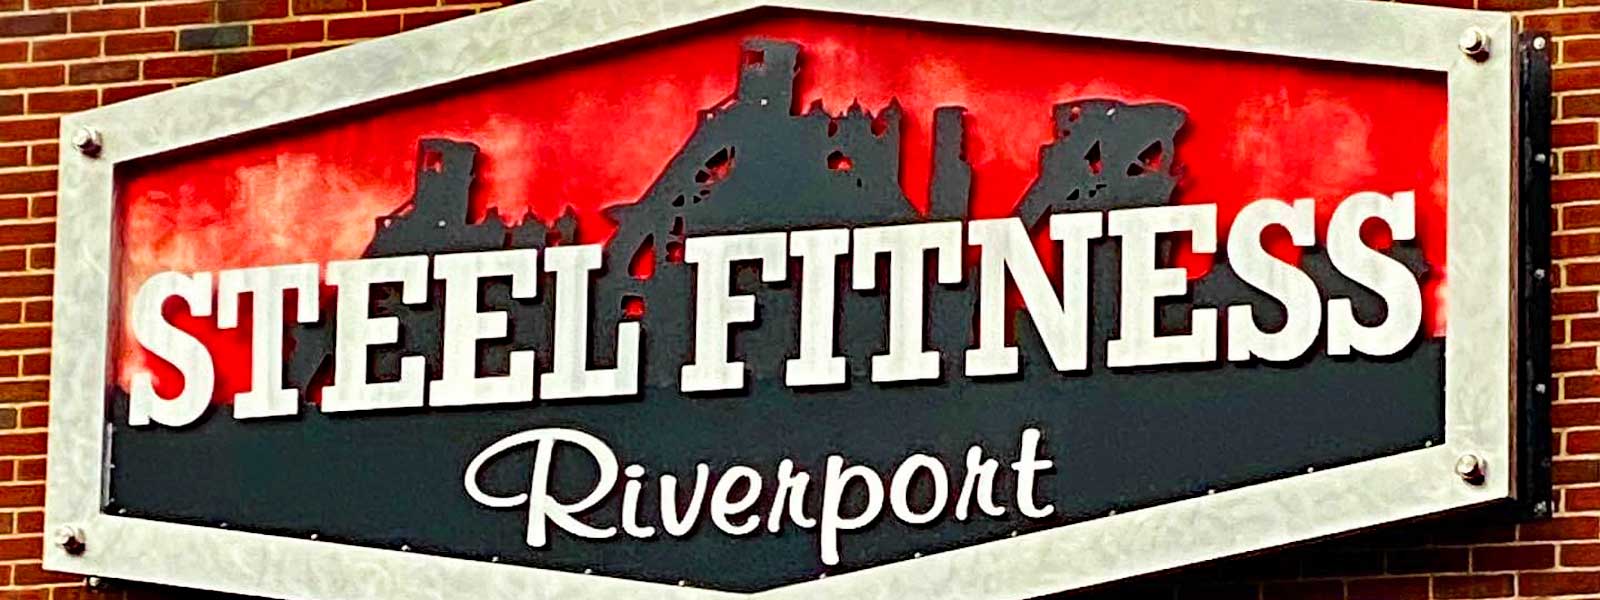 steel fitness riverport sign on the building